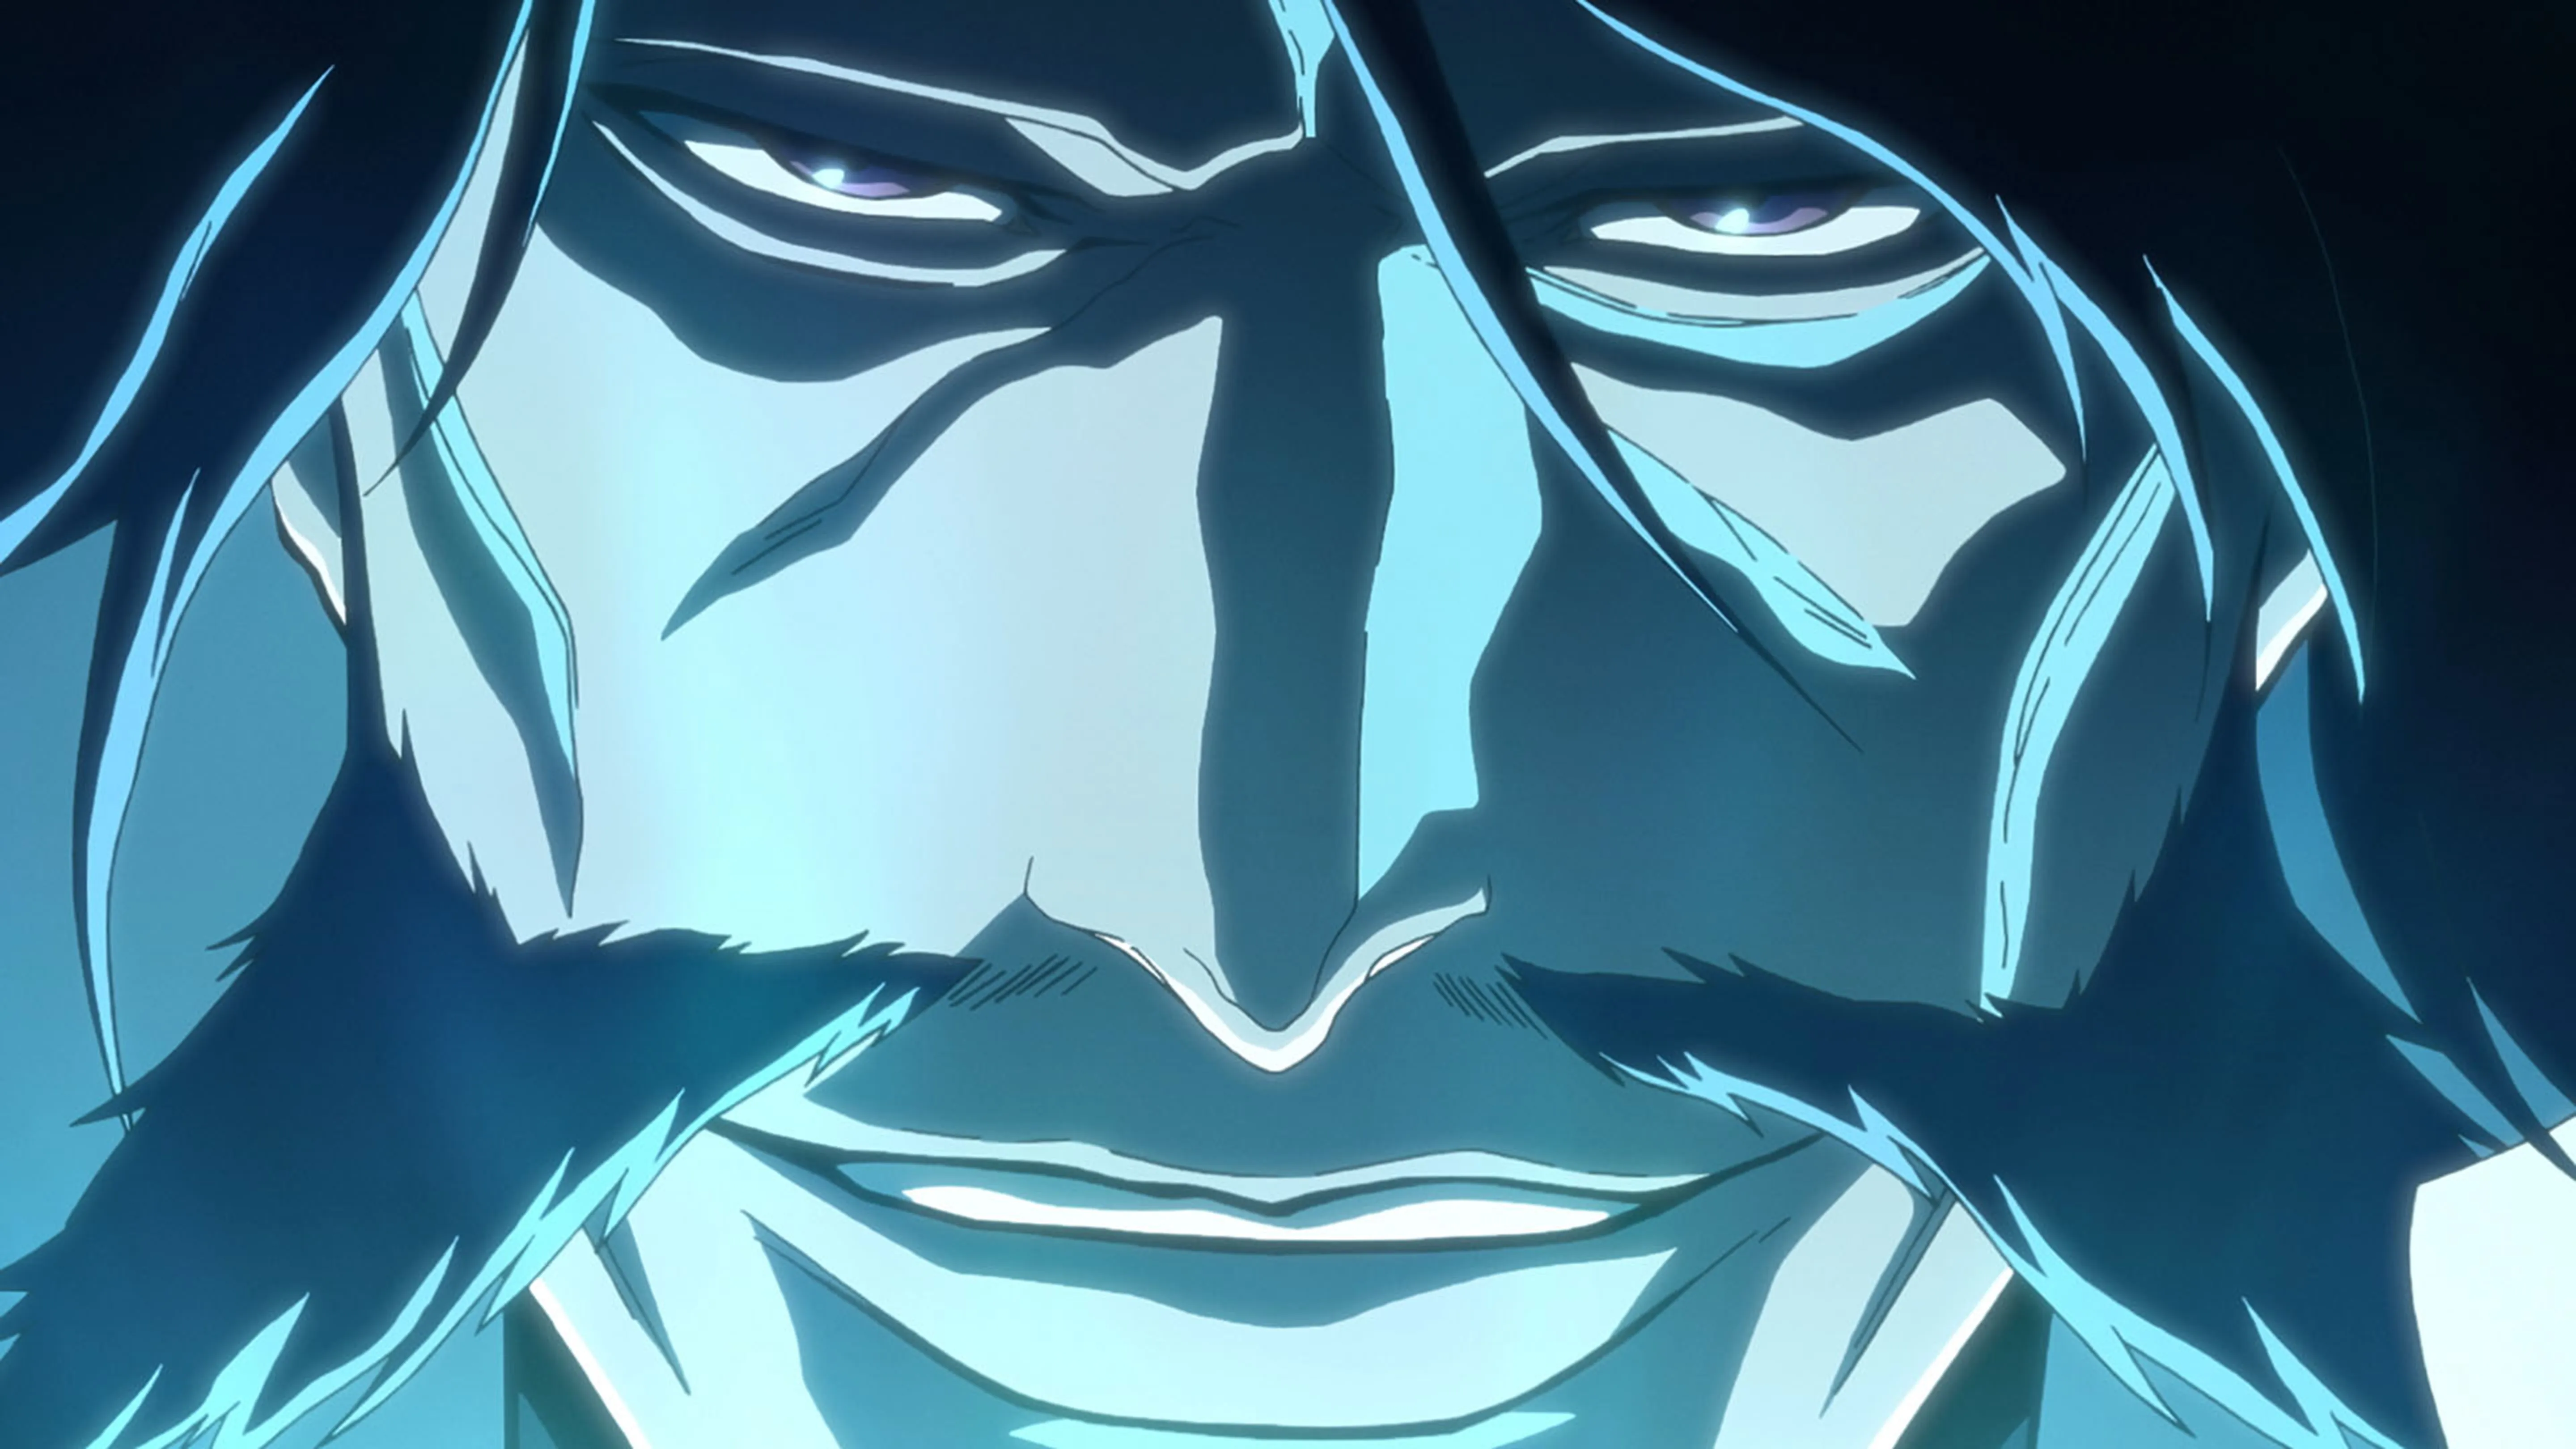 Bleach: Thousand-Year Blood War': Trailer, Release Date, and More